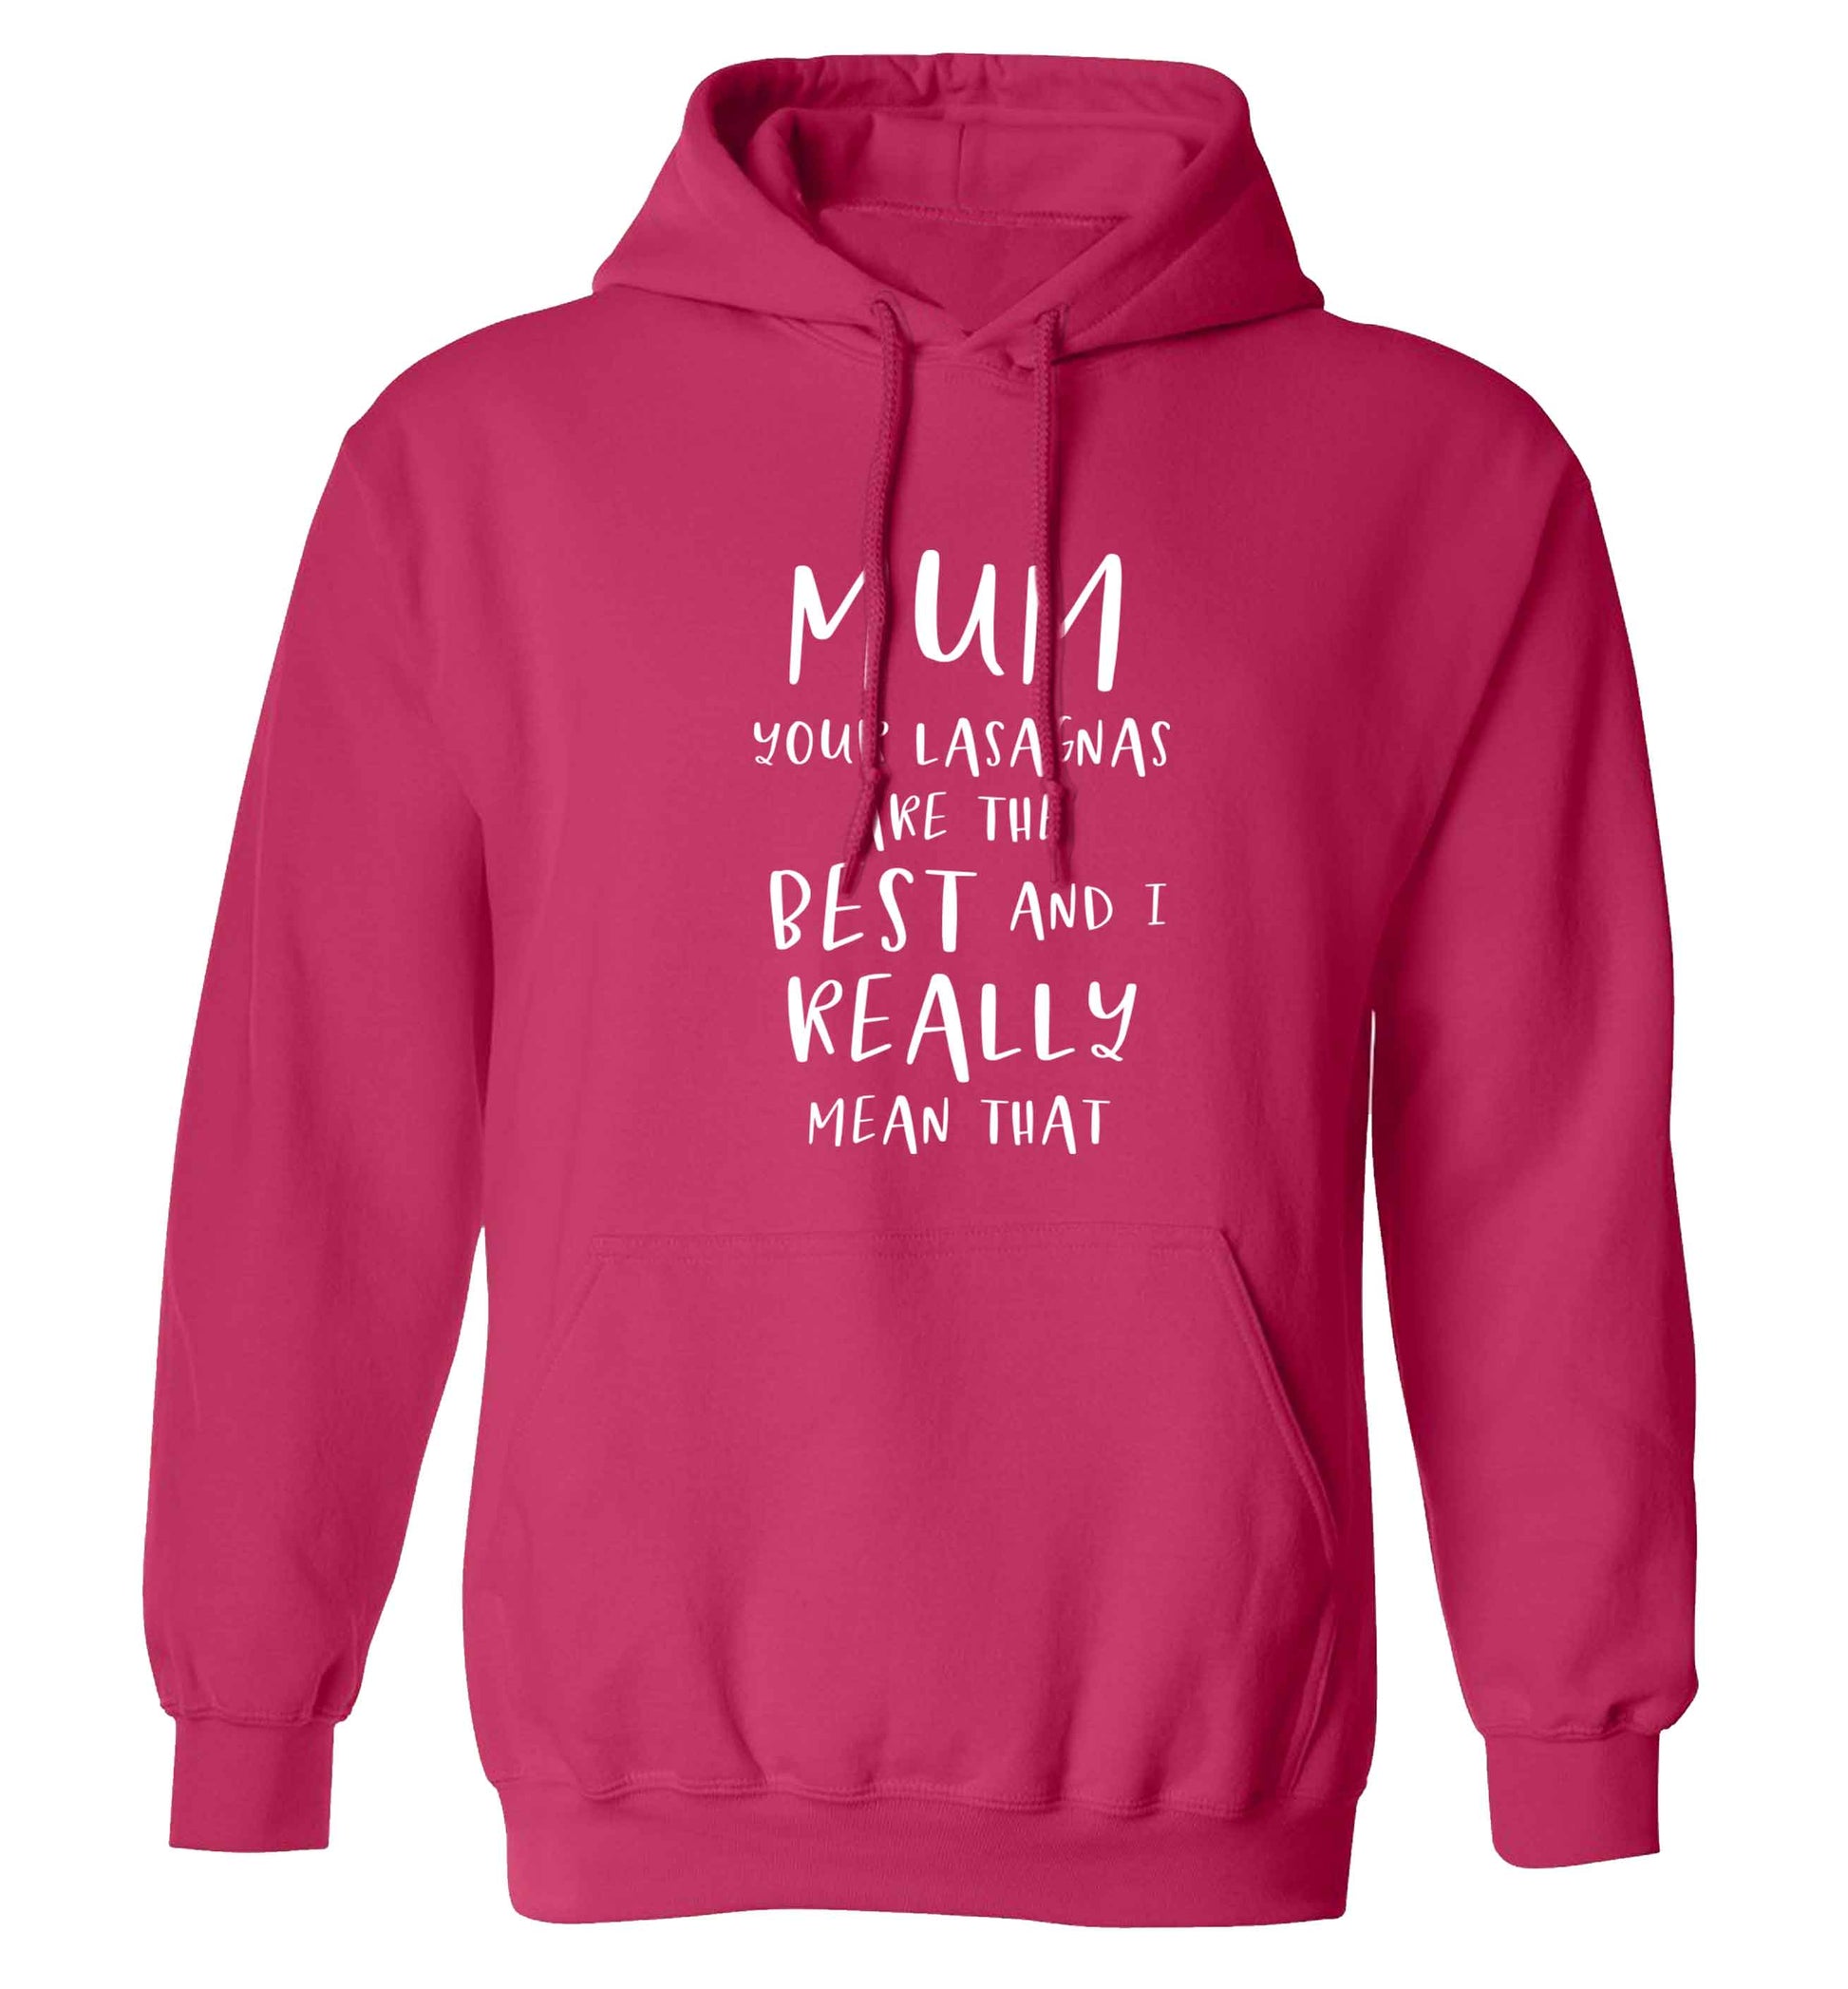 Funny gifts for your mum on mother's dayor her birthday! Mum your lasagnas are the best and I really mean that adults unisex pink hoodie 2XL